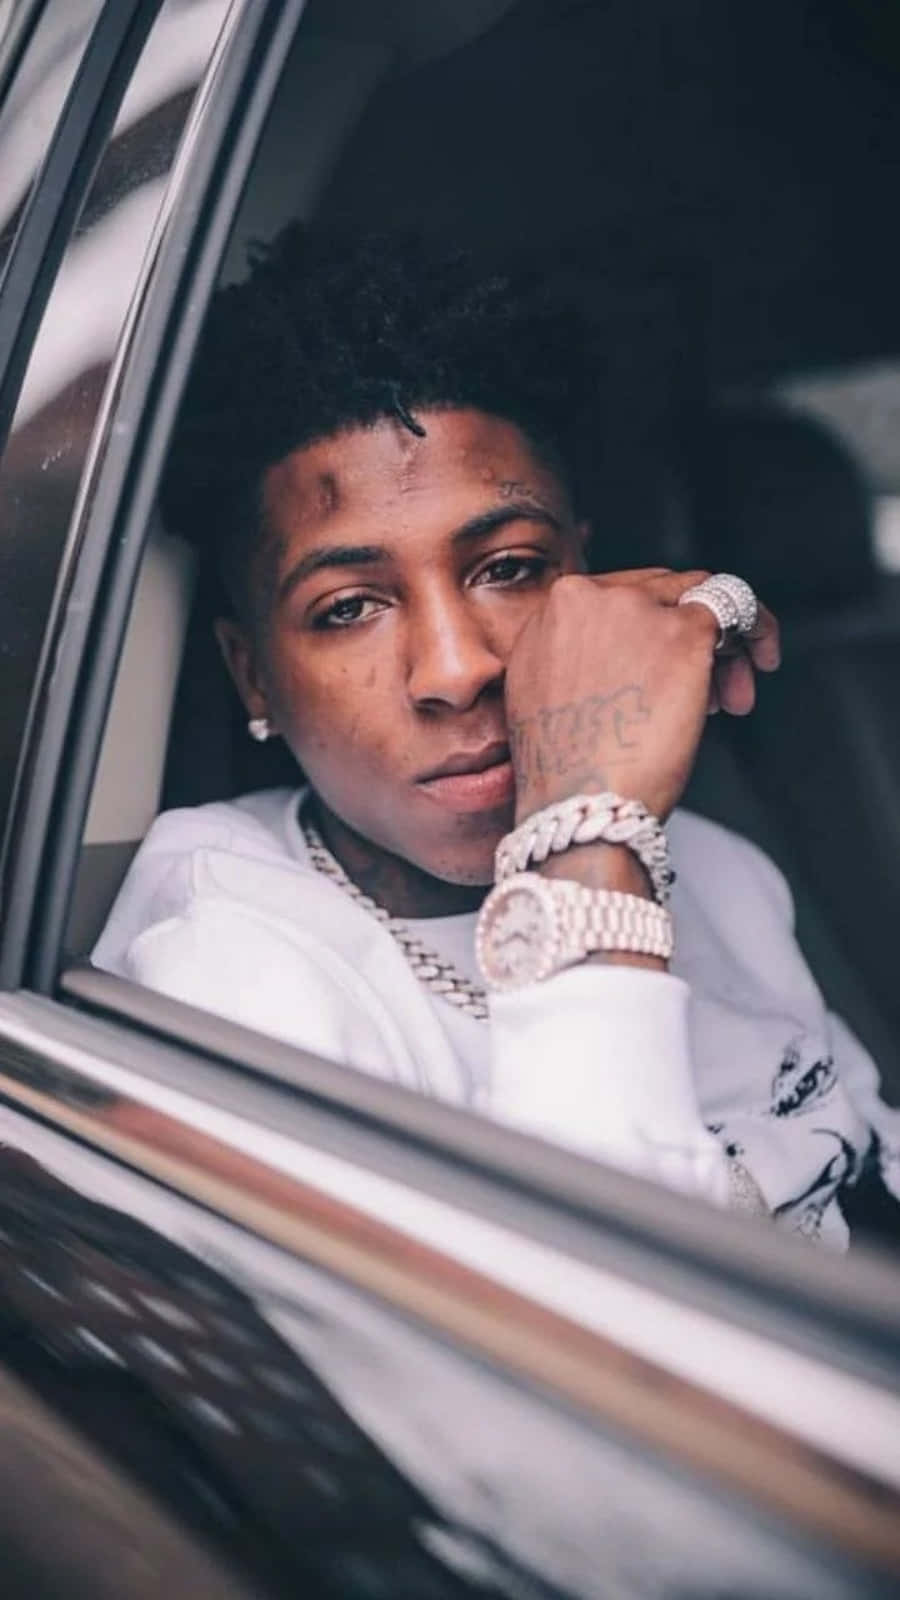 Nba Youngboy Flaunting His Luxury Ride